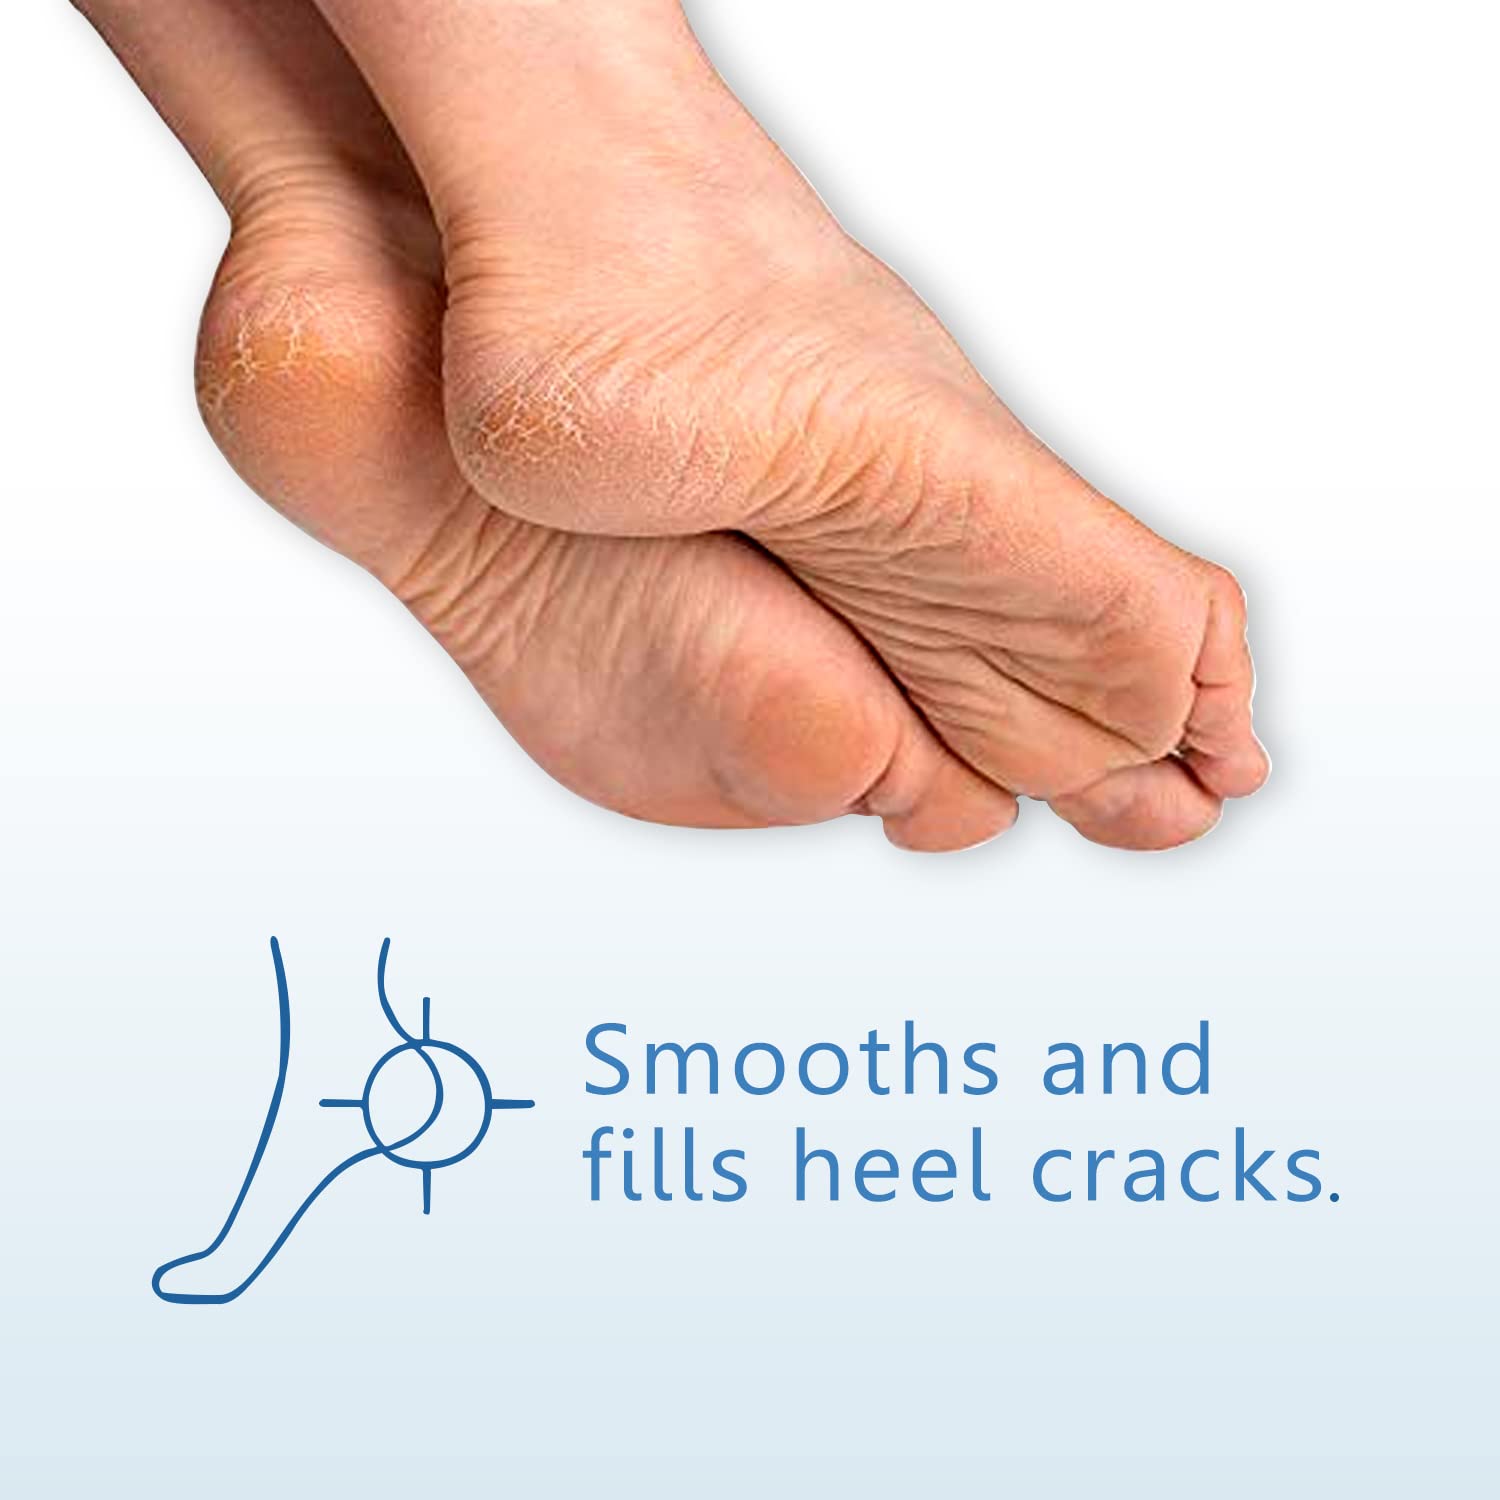 Top 20 Home Remedies to Get Rid of Cracked Heels